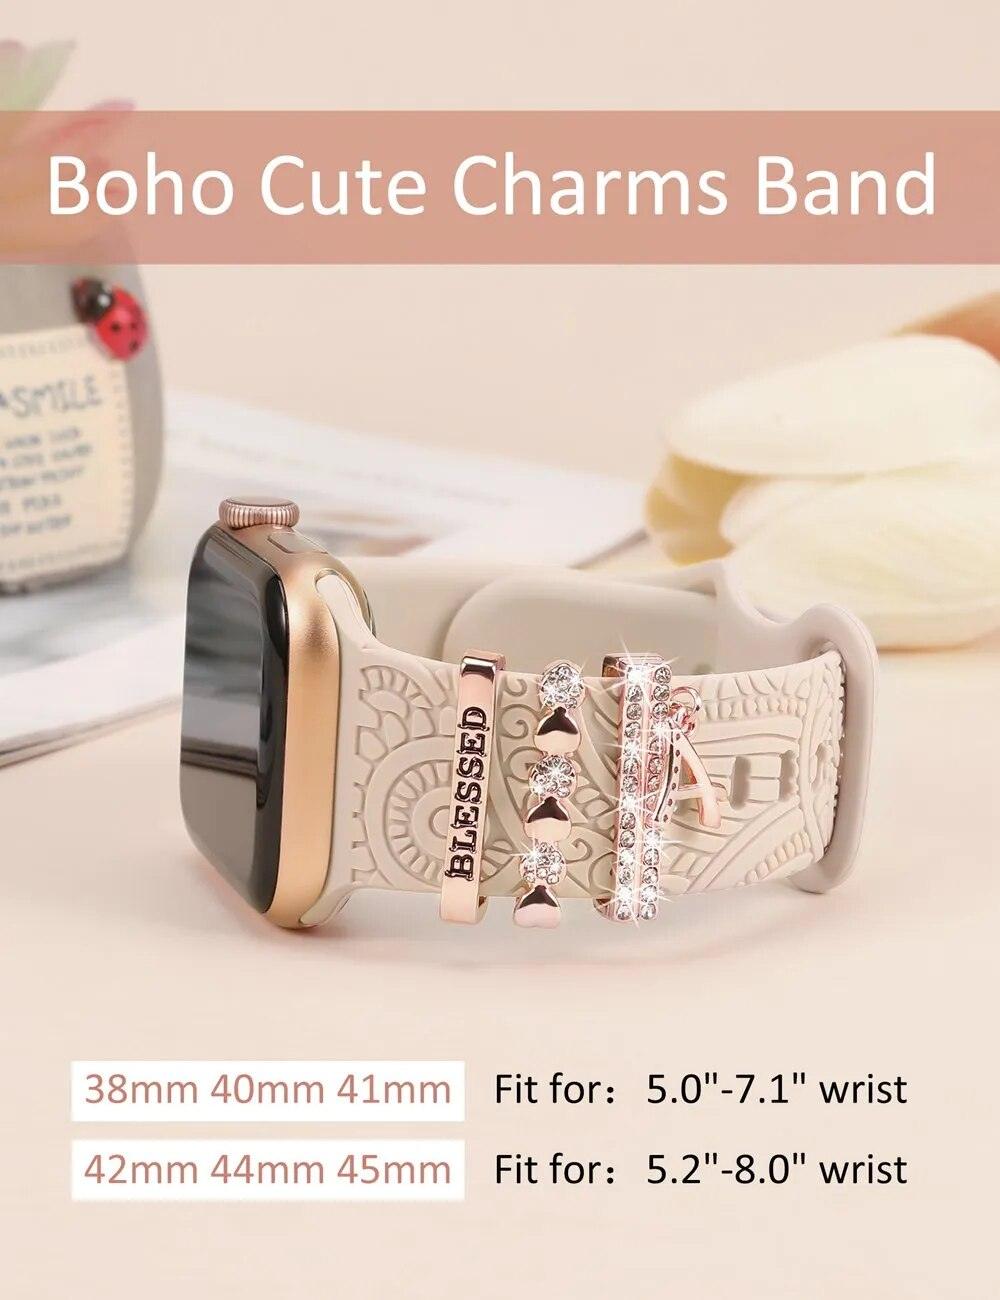 Engraved Silicone Apple Watch Bands With Cute Charms - Watch Accessories - Viva Timepiece